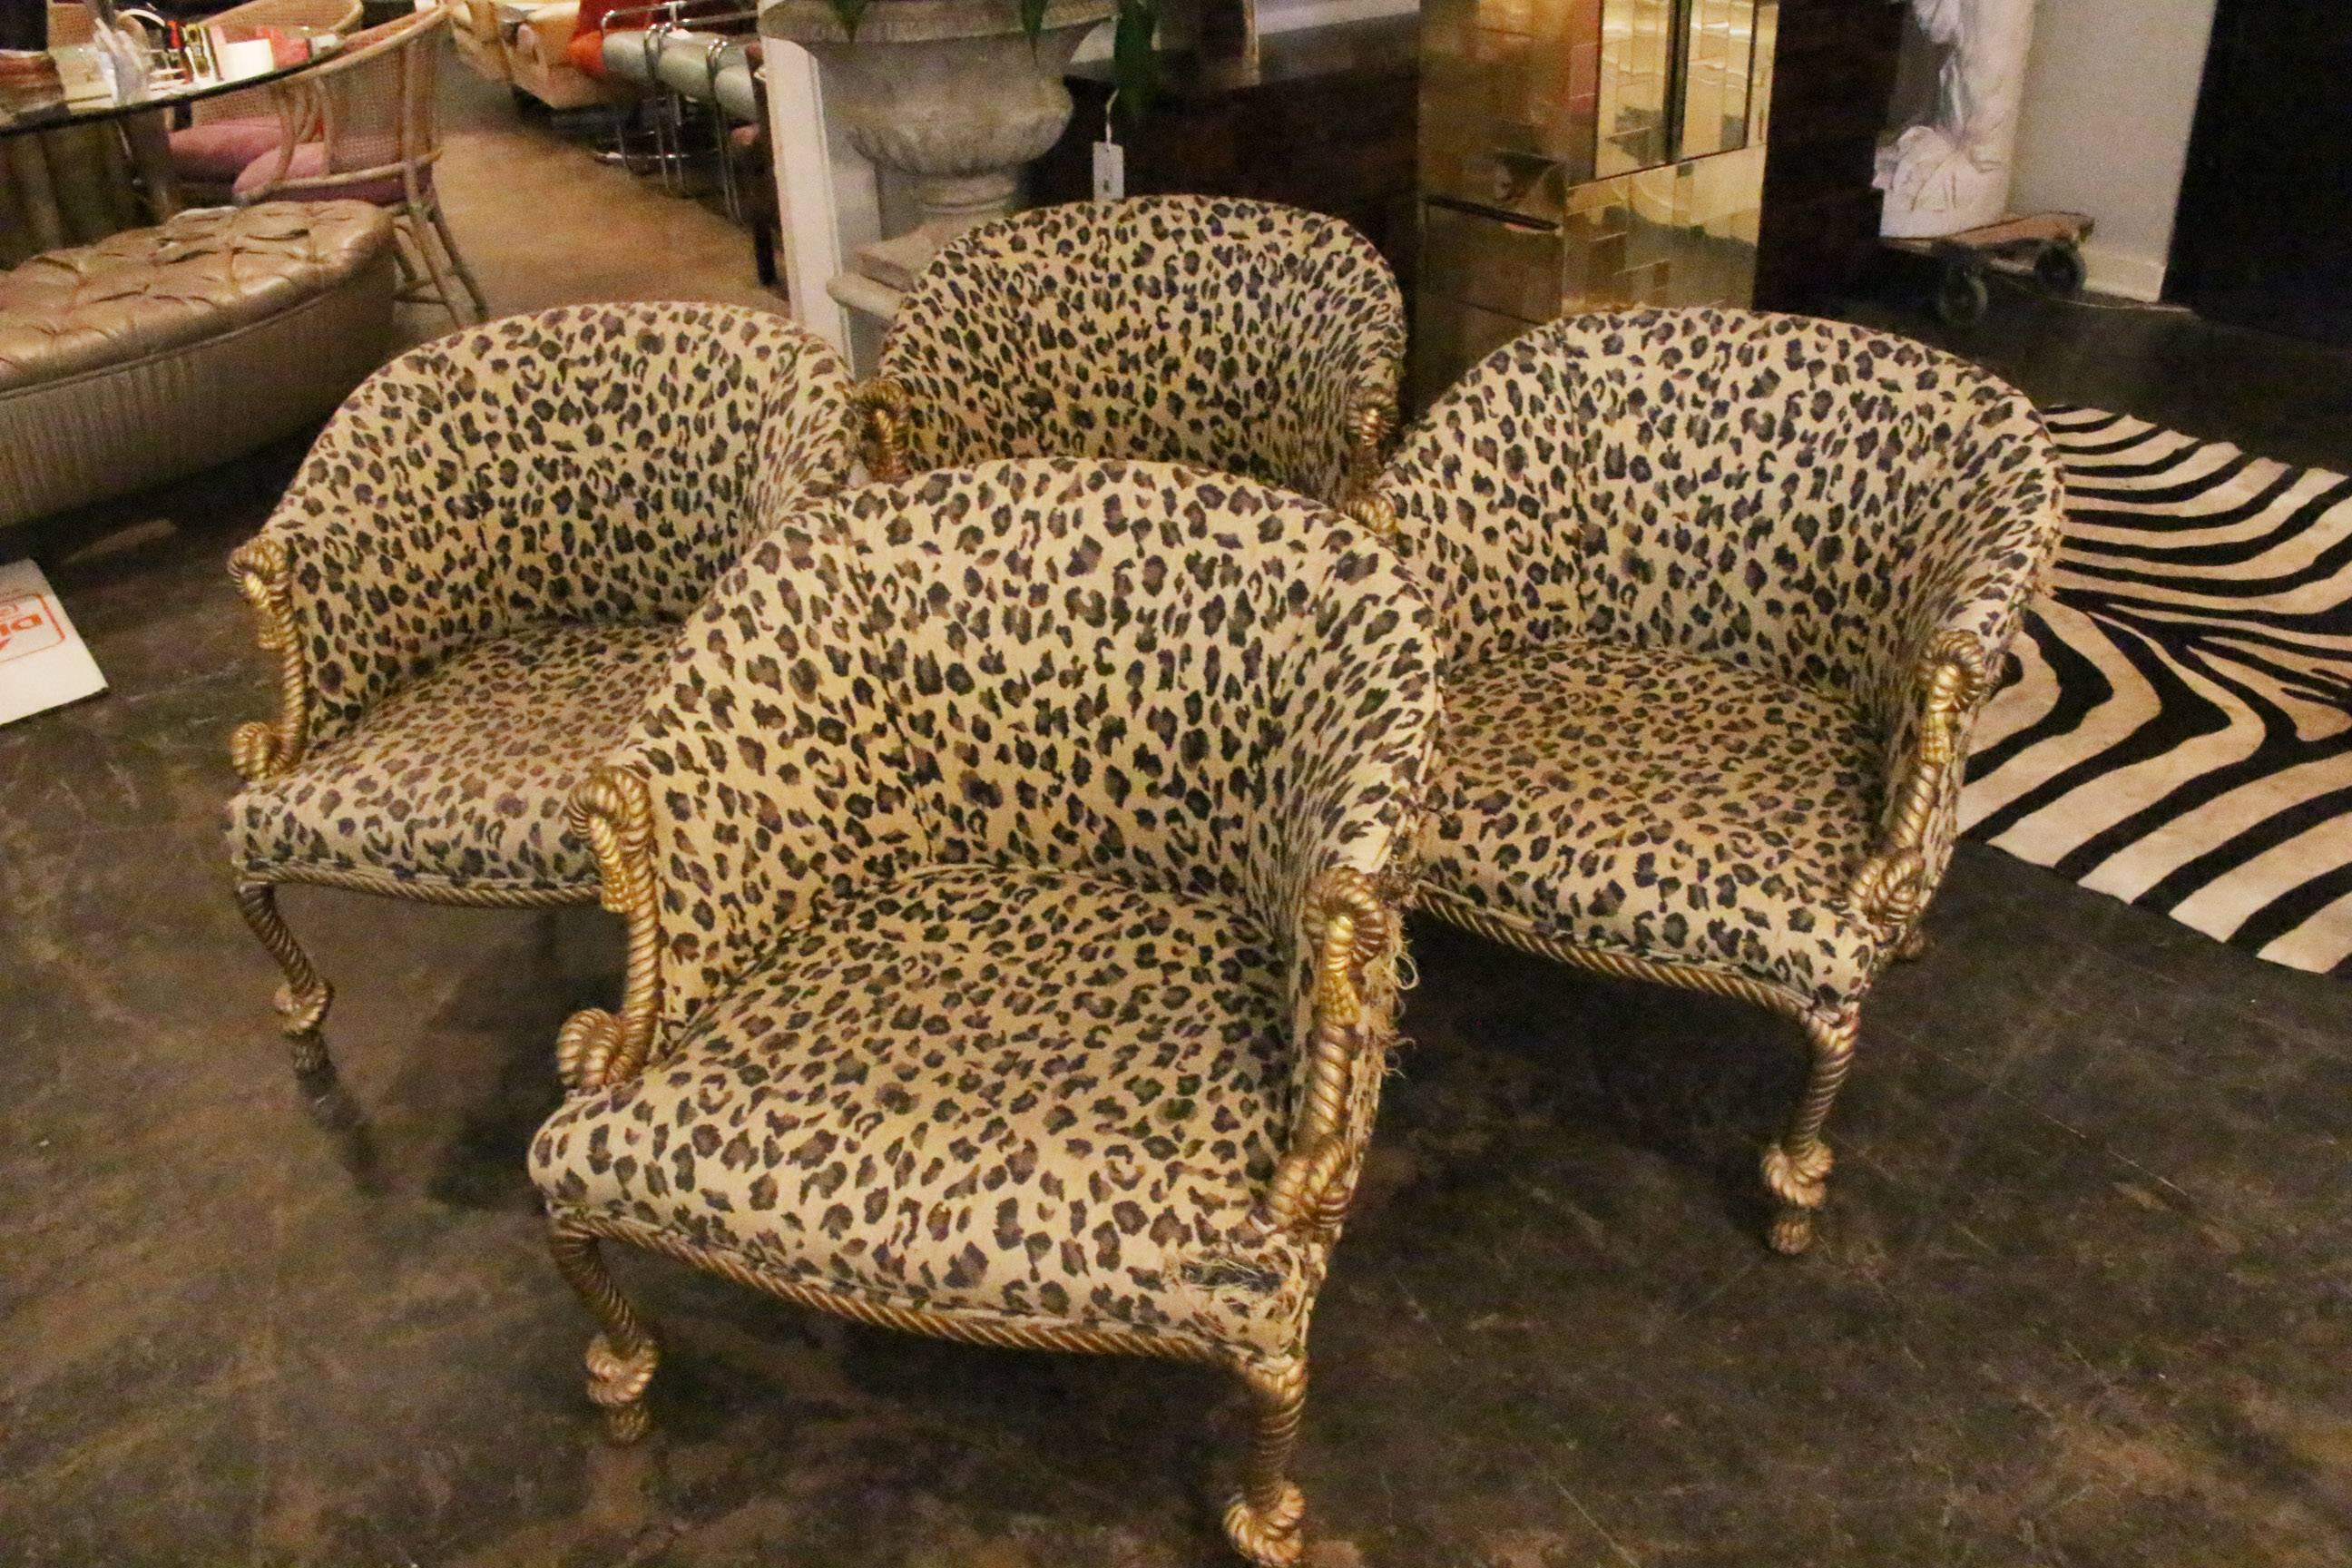 Pair of gilded leopard print Rope & Tassel chairs. These chairs would be so fabulous in hot pink velvet and new gold finish. The upholstery does need to be replaced. (Two pairs available).

Dimensions: 26